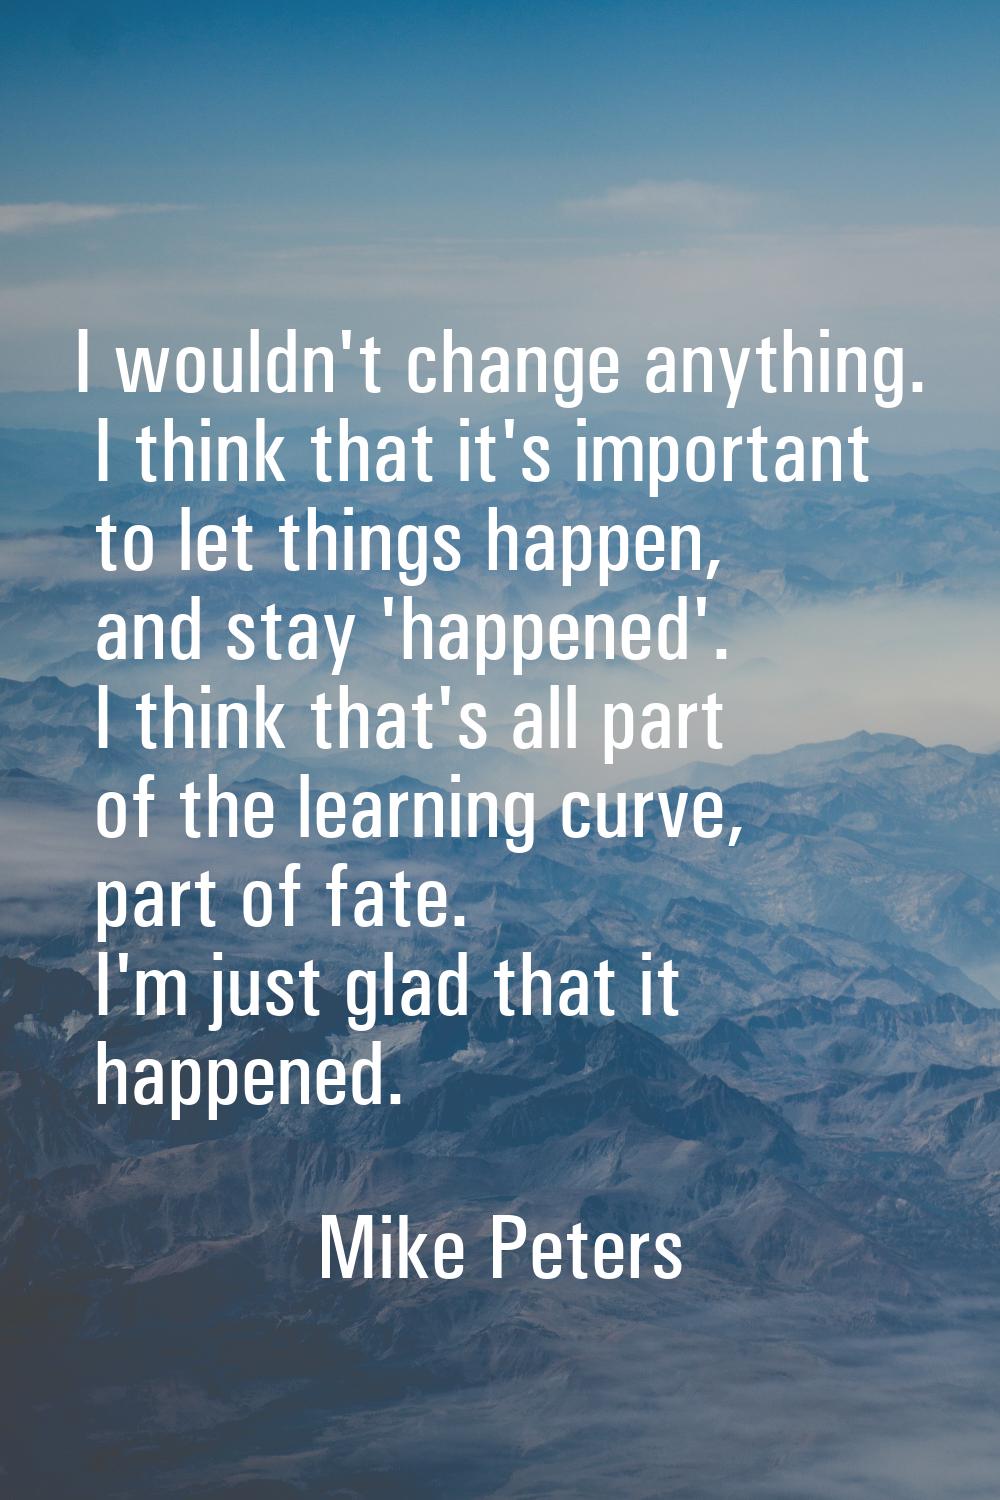 I wouldn't change anything. I think that it's important to let things happen, and stay 'happened'. 